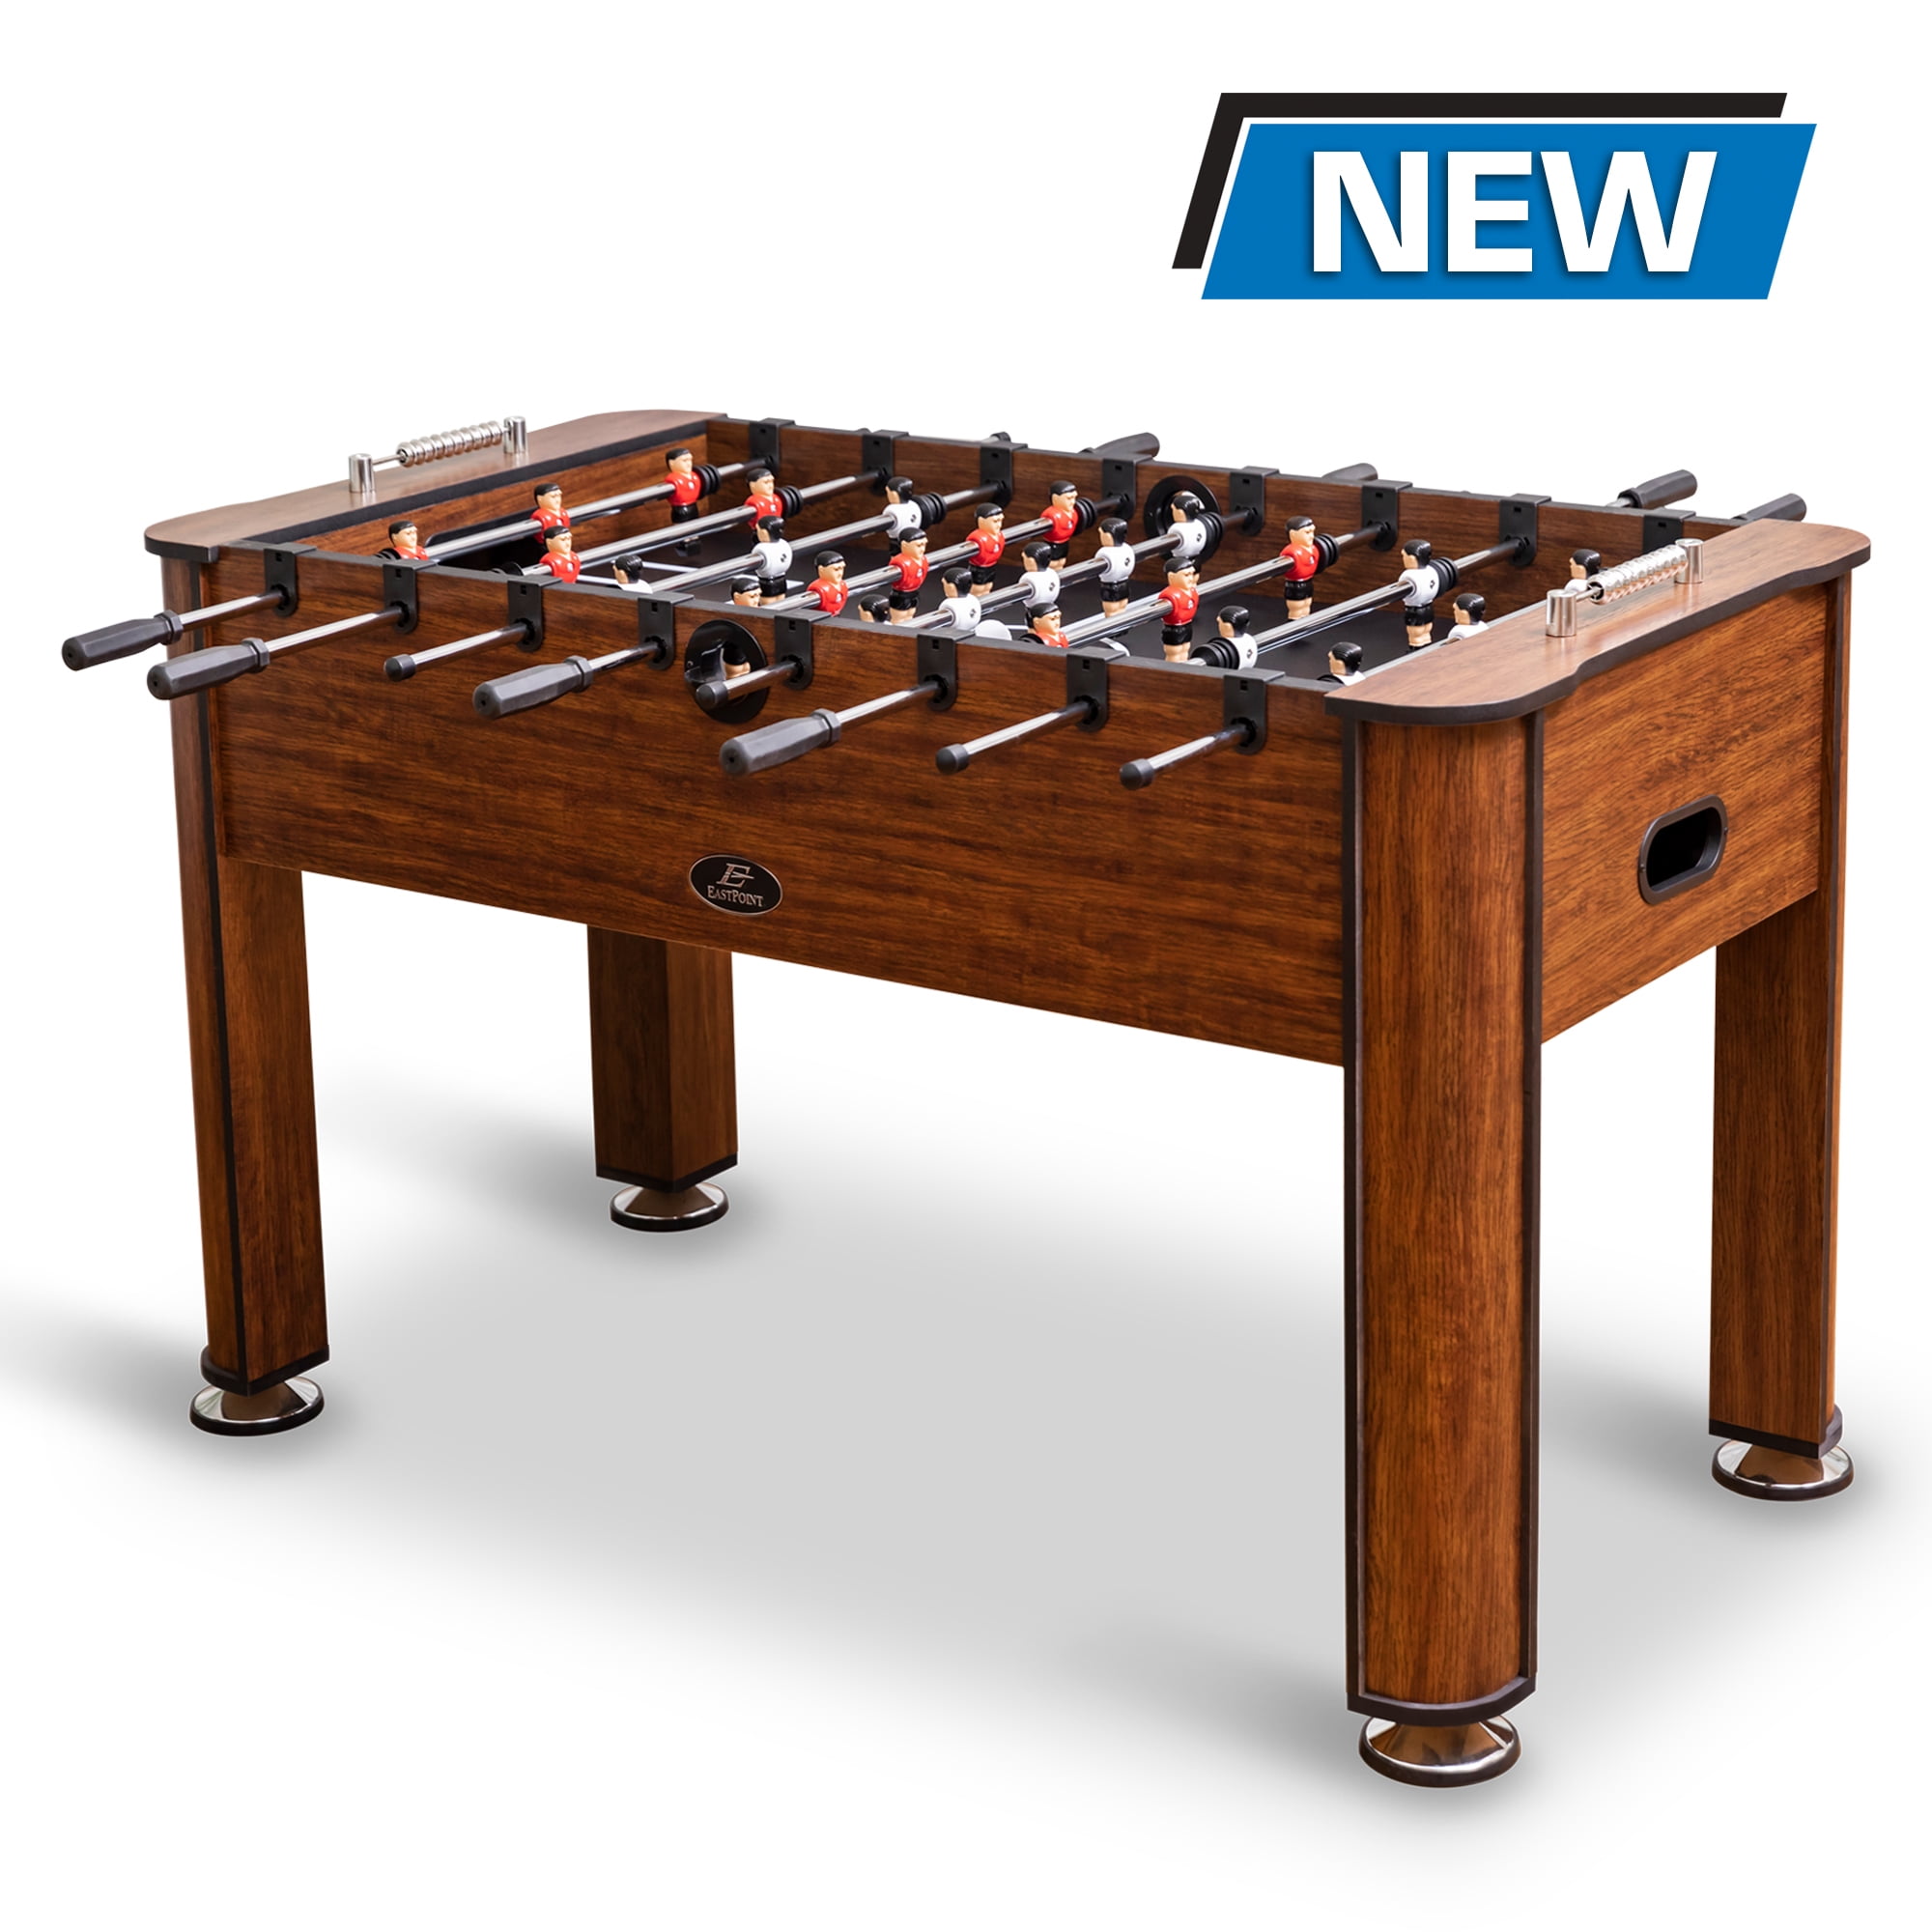 Deluxe Football Table Soccer Game Indoor Arcade Family Sports 